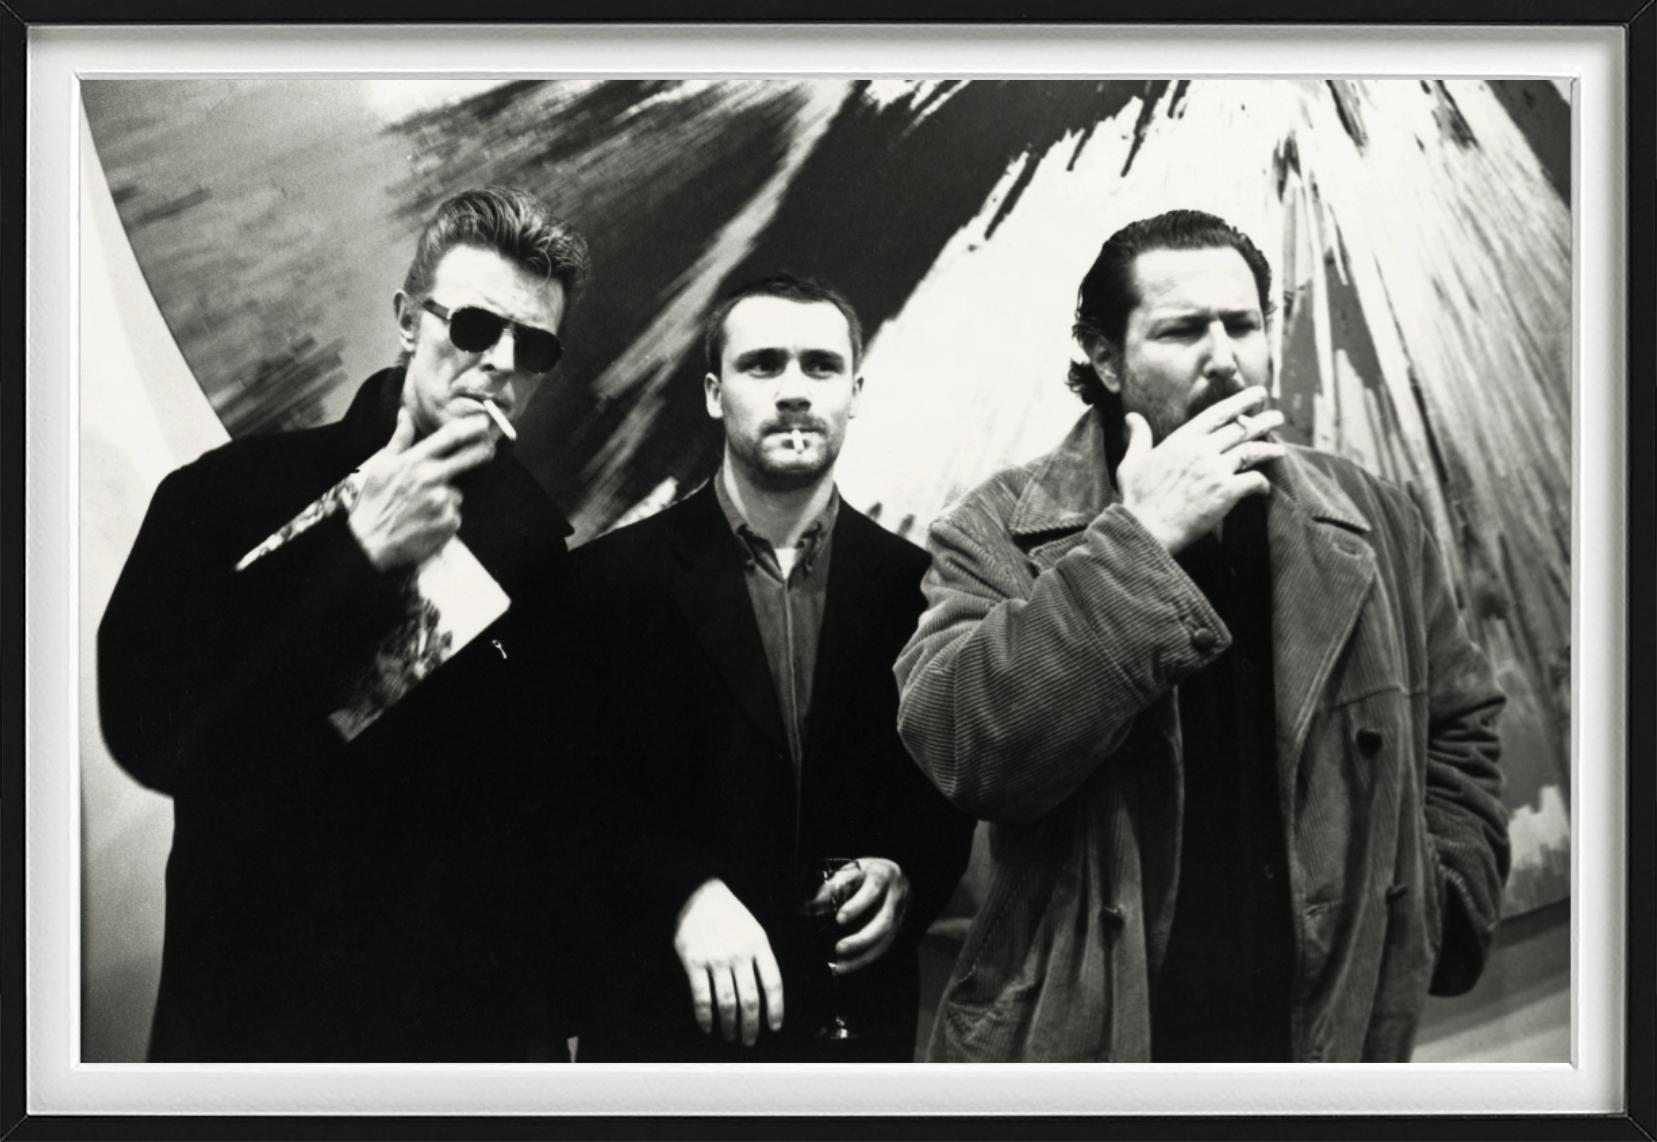 David Bowie, Damien Hirst, Julian Schnabel, New York - Contemporary Photograph by Roxanne Lowit